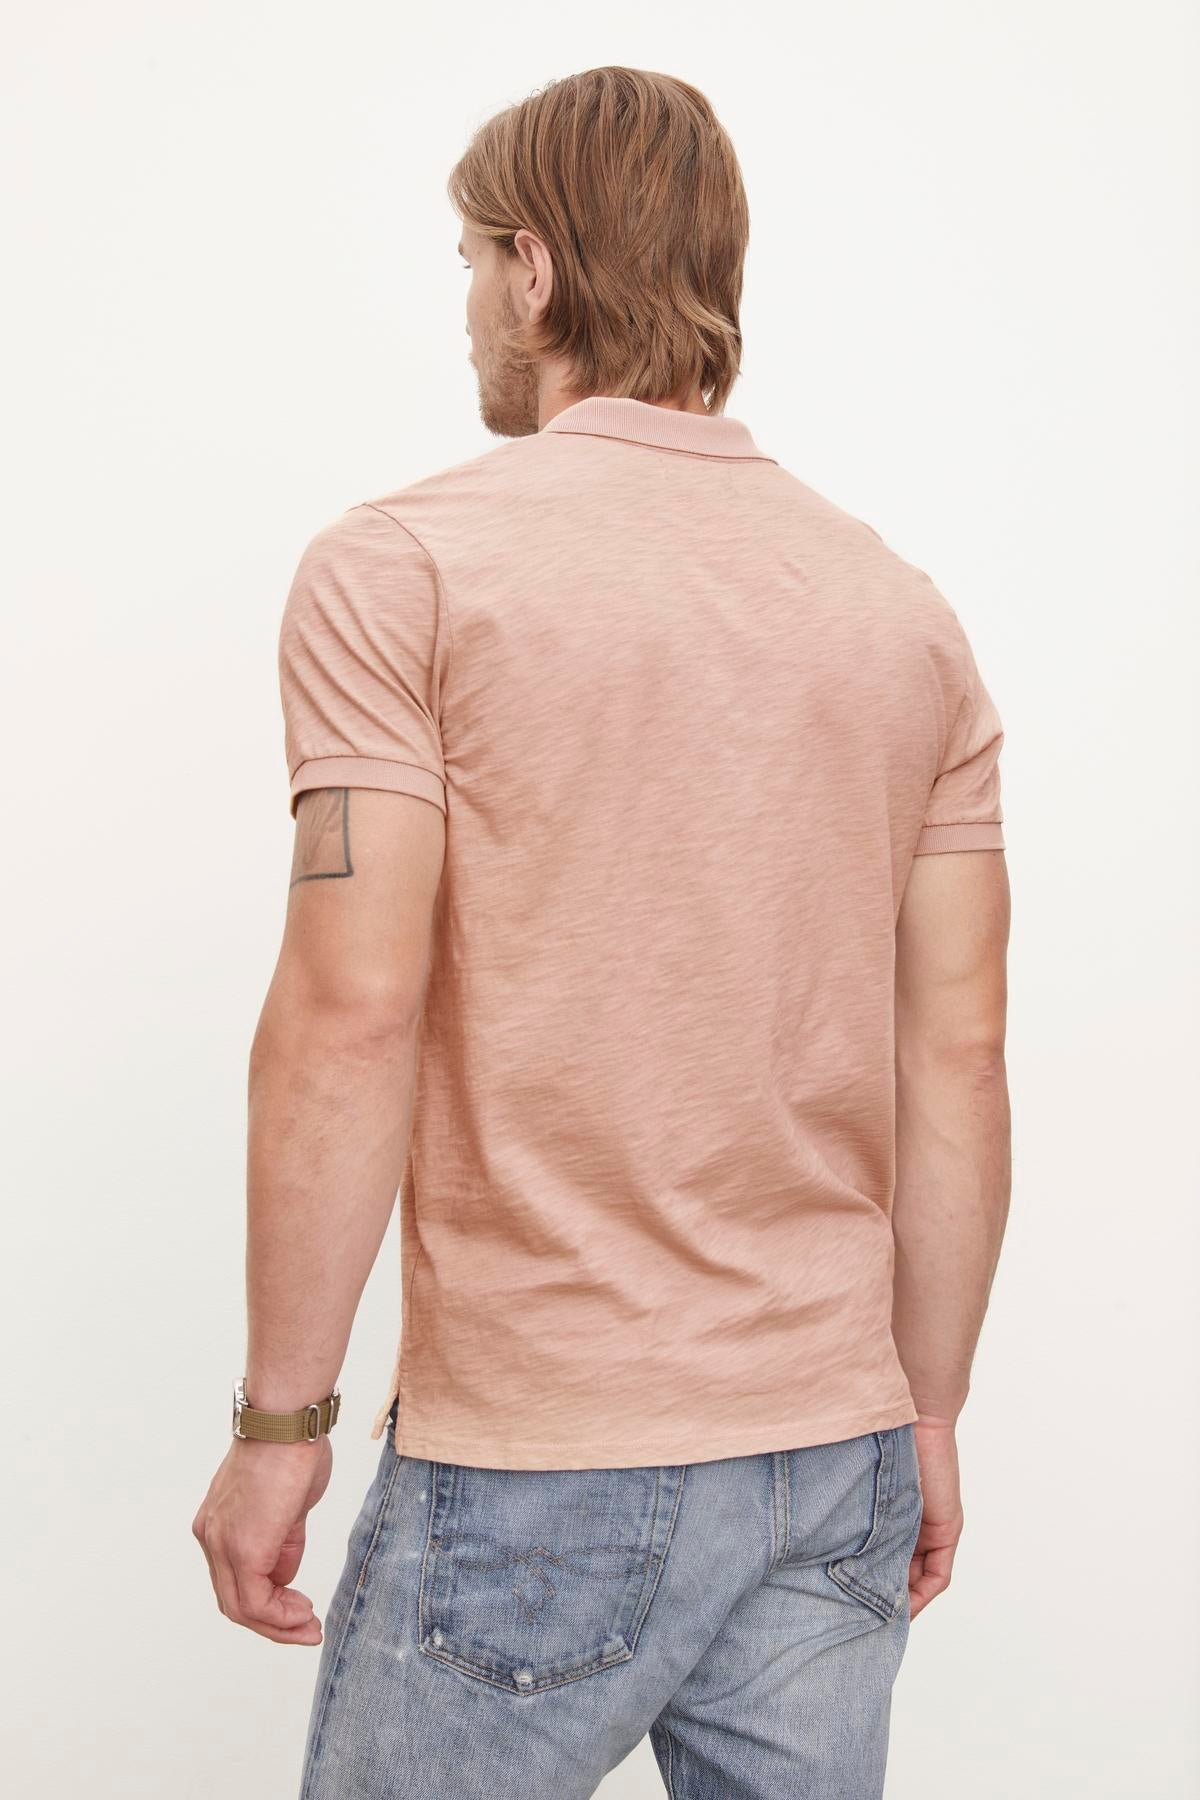 Man in a Velvet by Graham & Spencer NIKO POLO and blue jeans, viewed from behind, revealing a tattoo on his left arm.-36890746749121